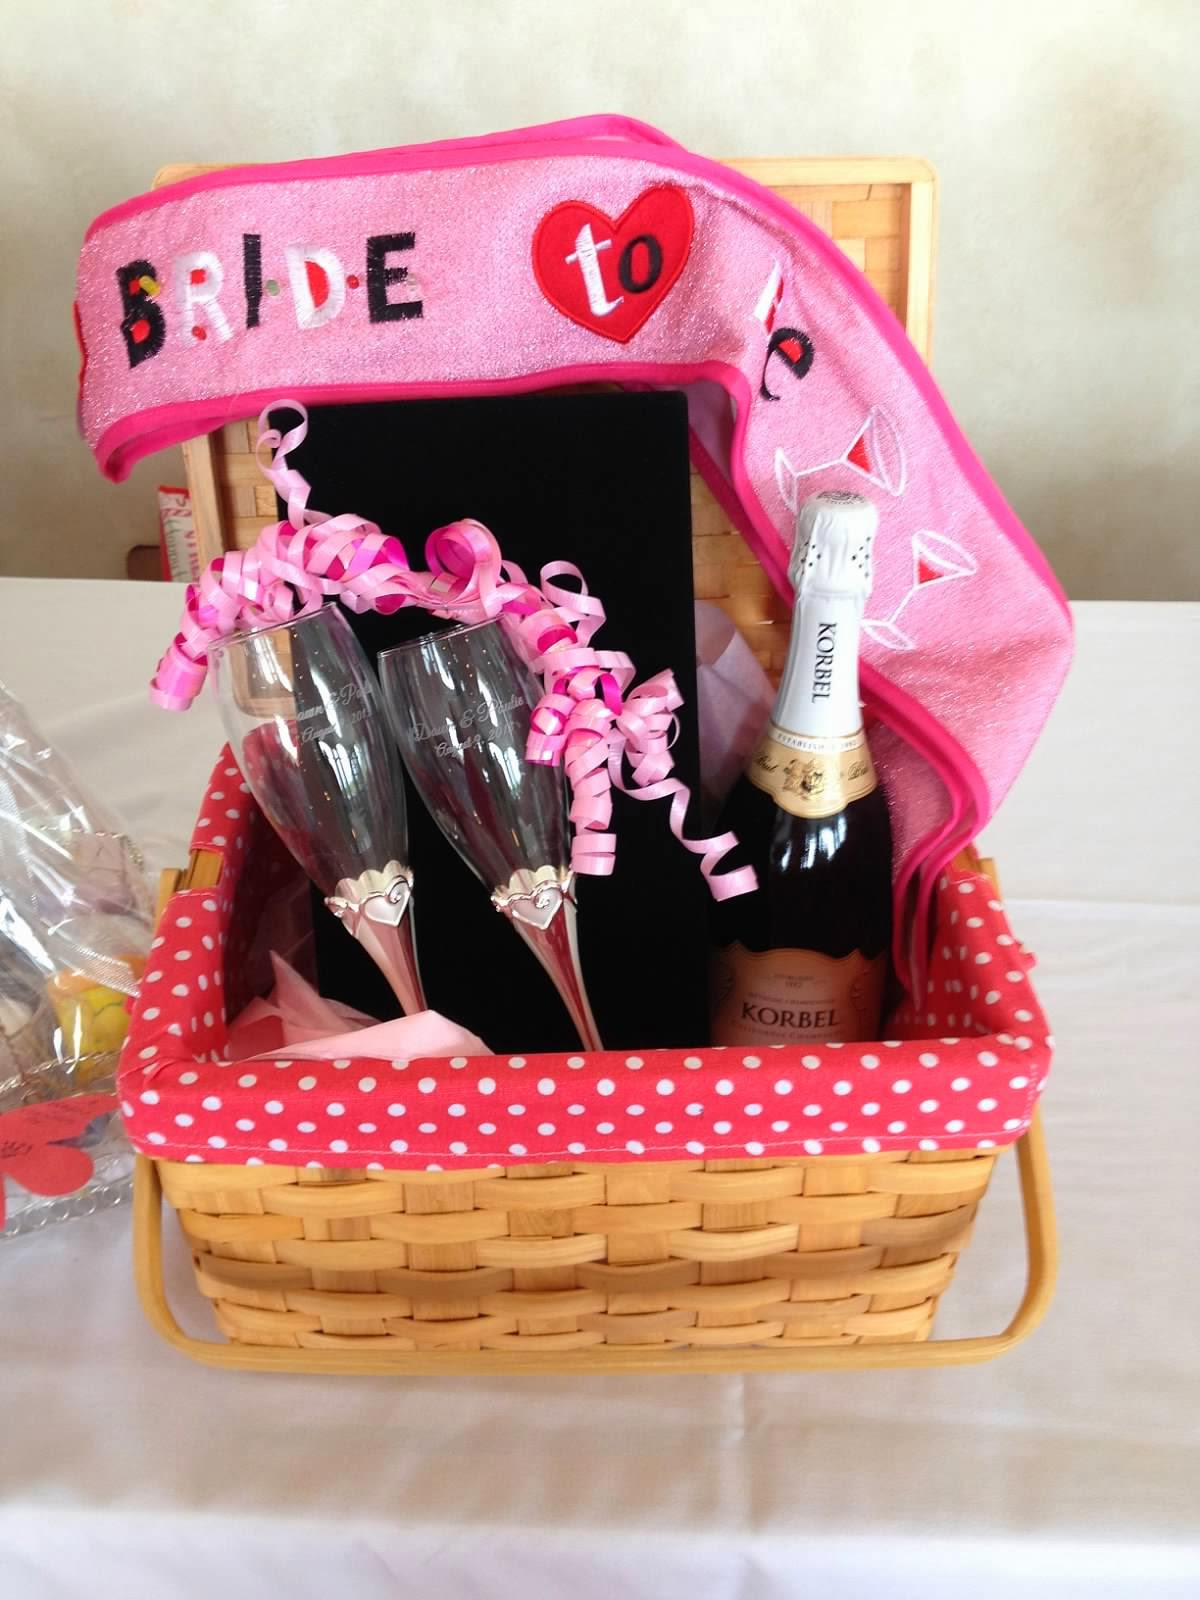 Ideas For Wedding Shower Gift
 2 Girls 1 Year 730 Moments to Wedding Wednesdays